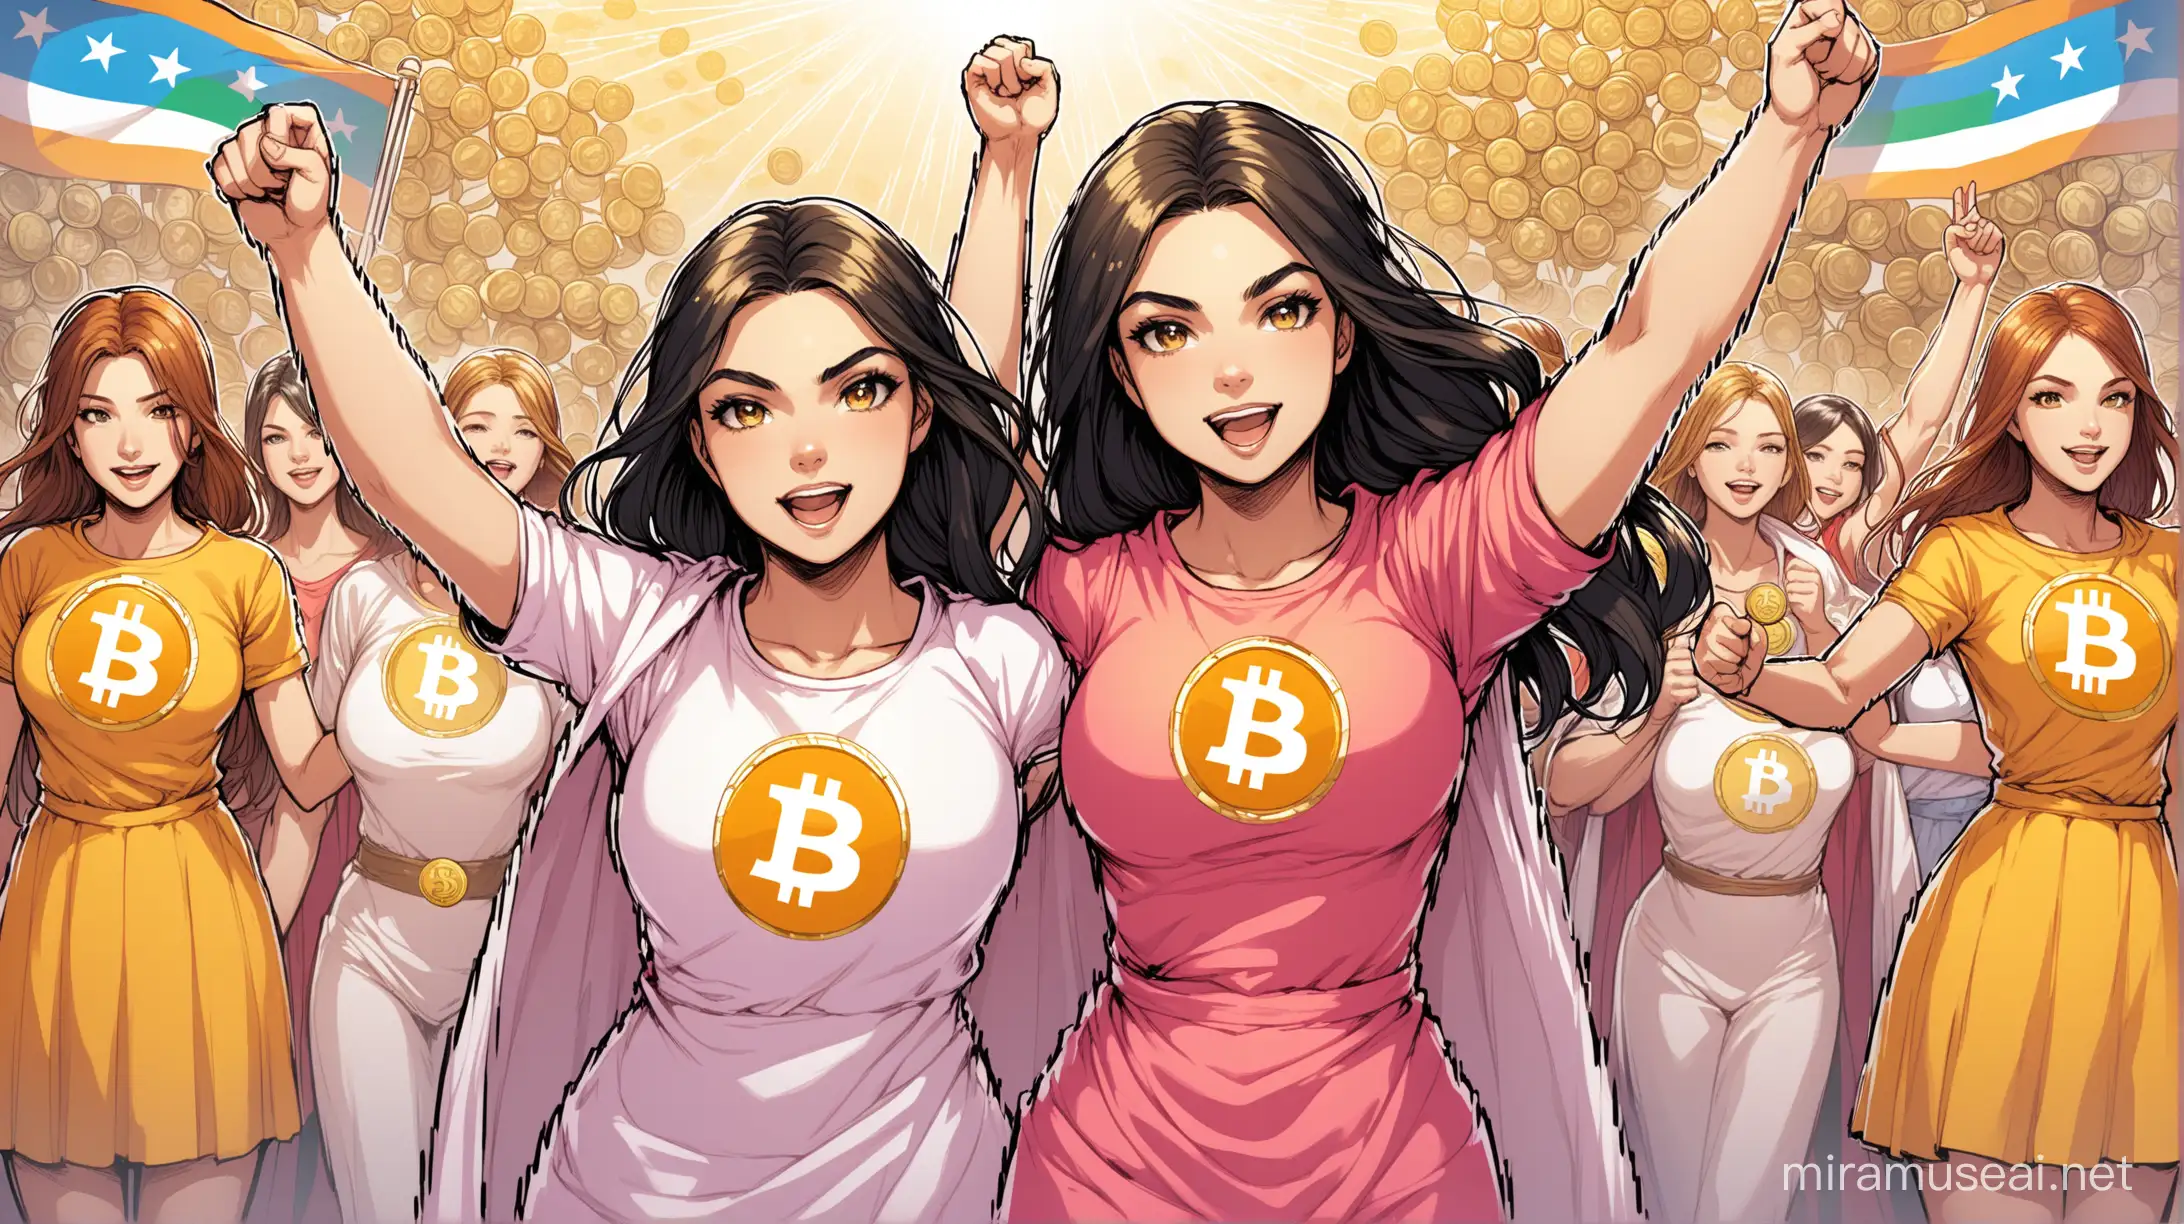 Empowering Women Advocating Human Rights and Bitcoin Freedom